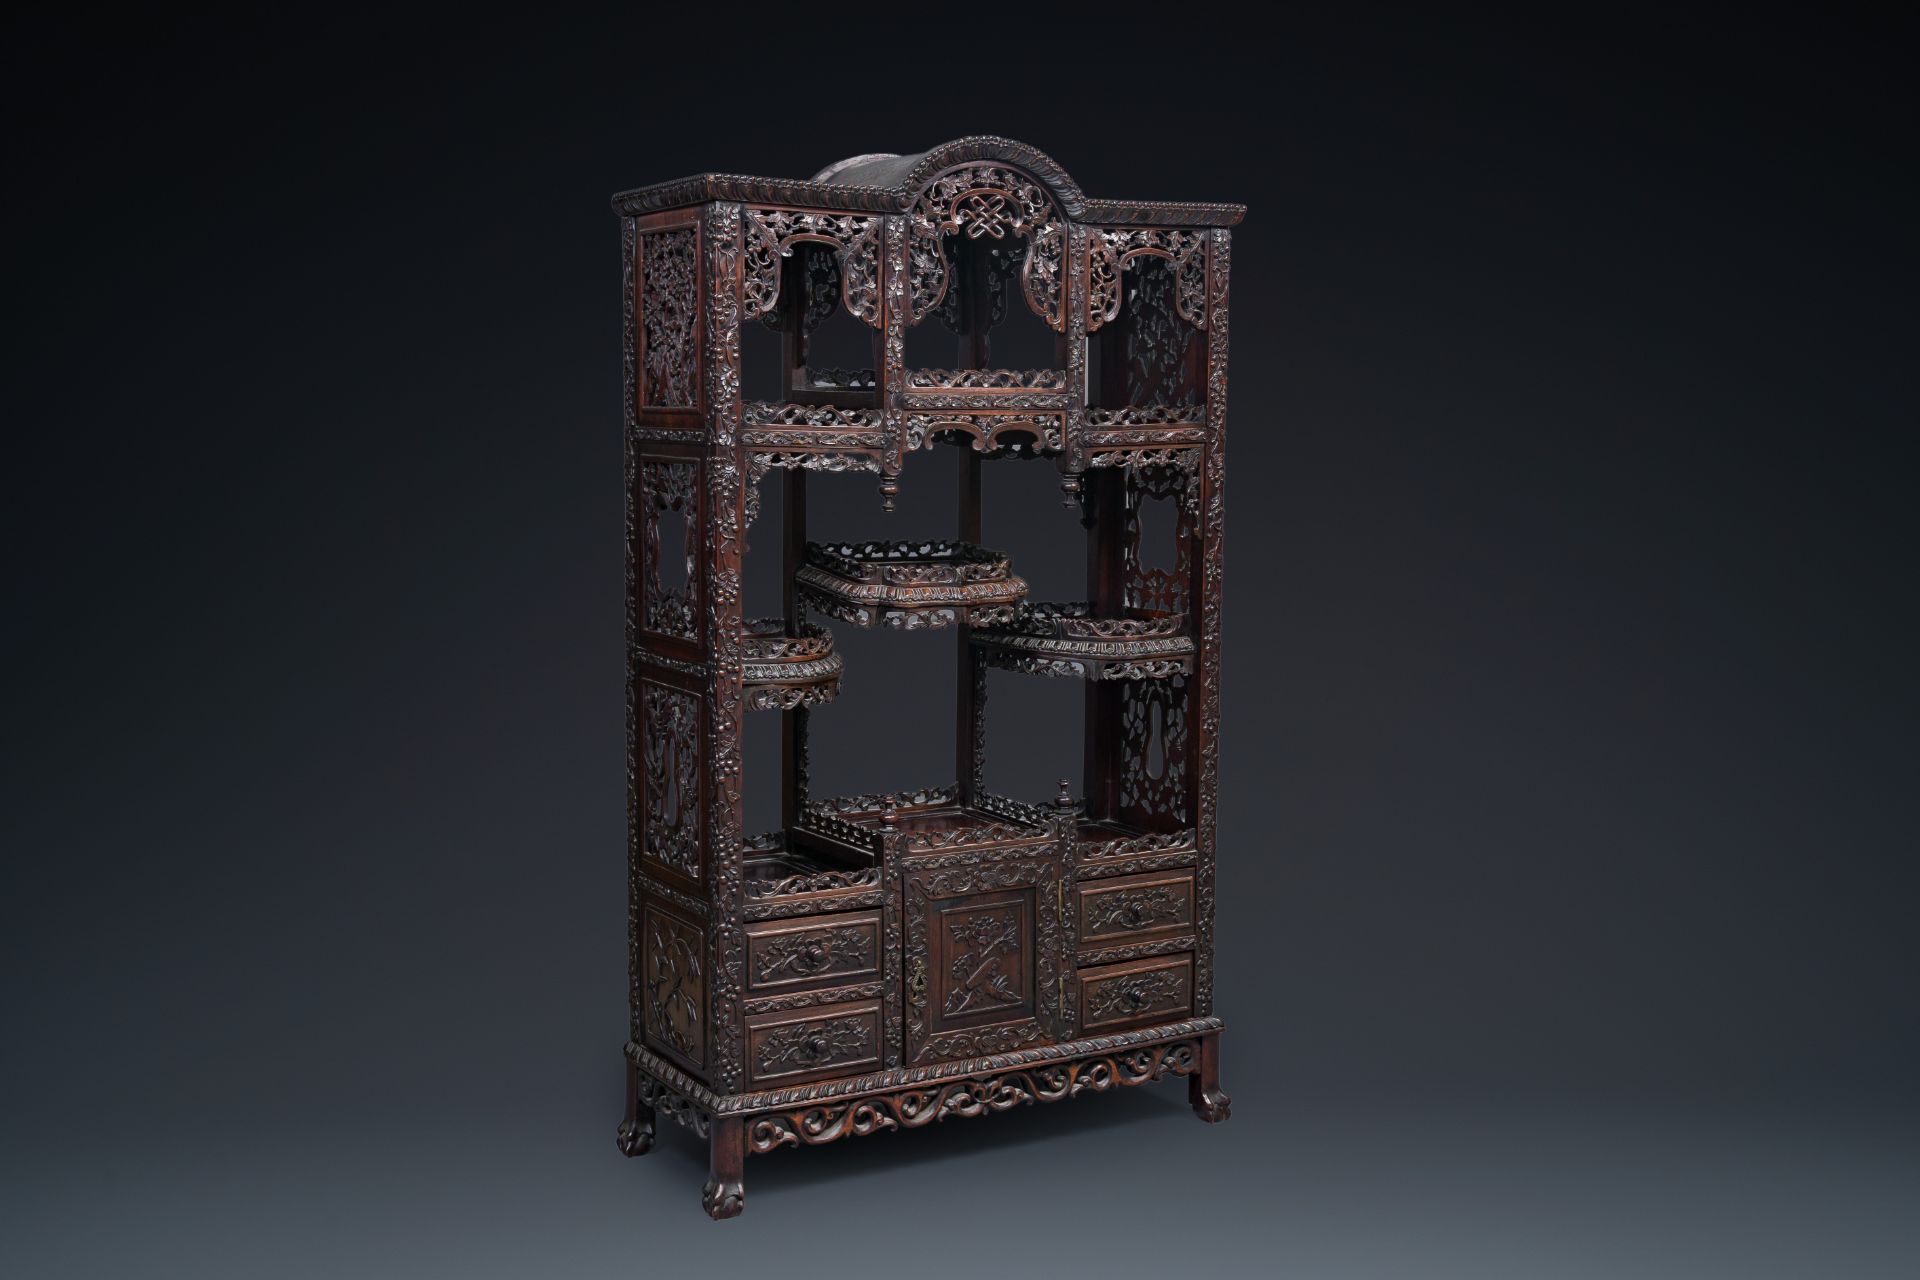 A richly carved Chinese hongmu wooden etagere cupboard, Canton, 19th C.